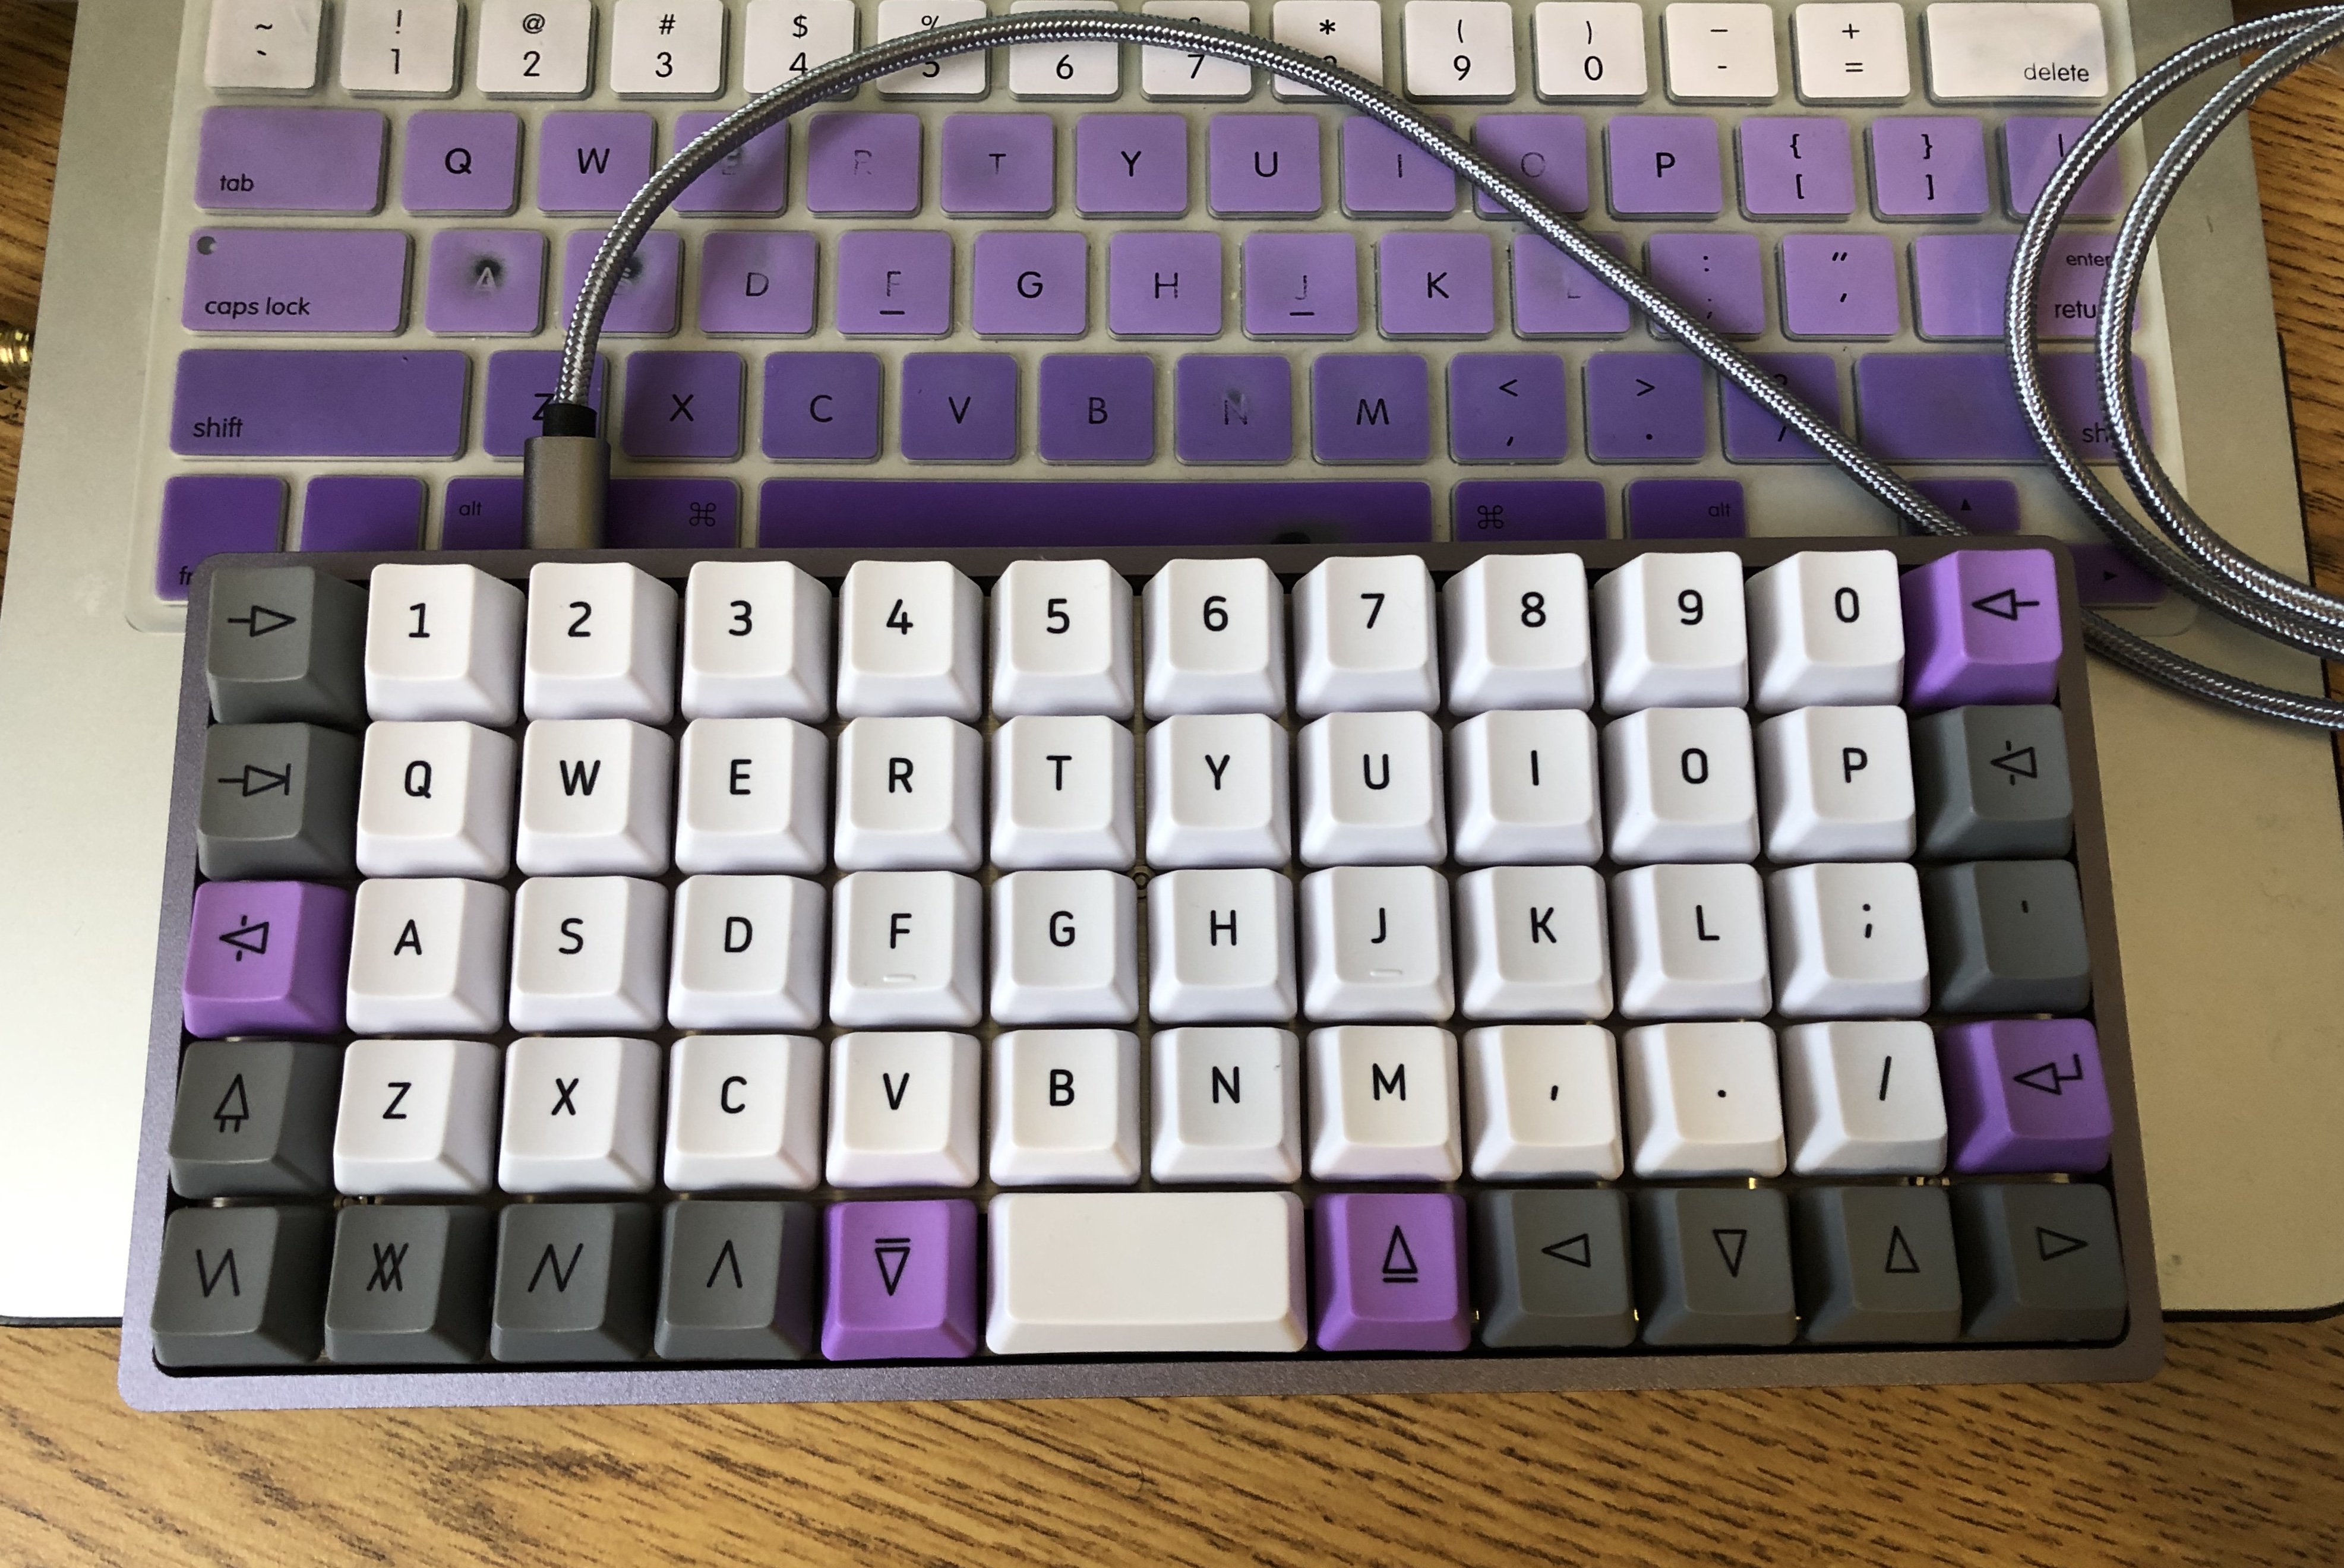 The Preonic, with its original keycaps